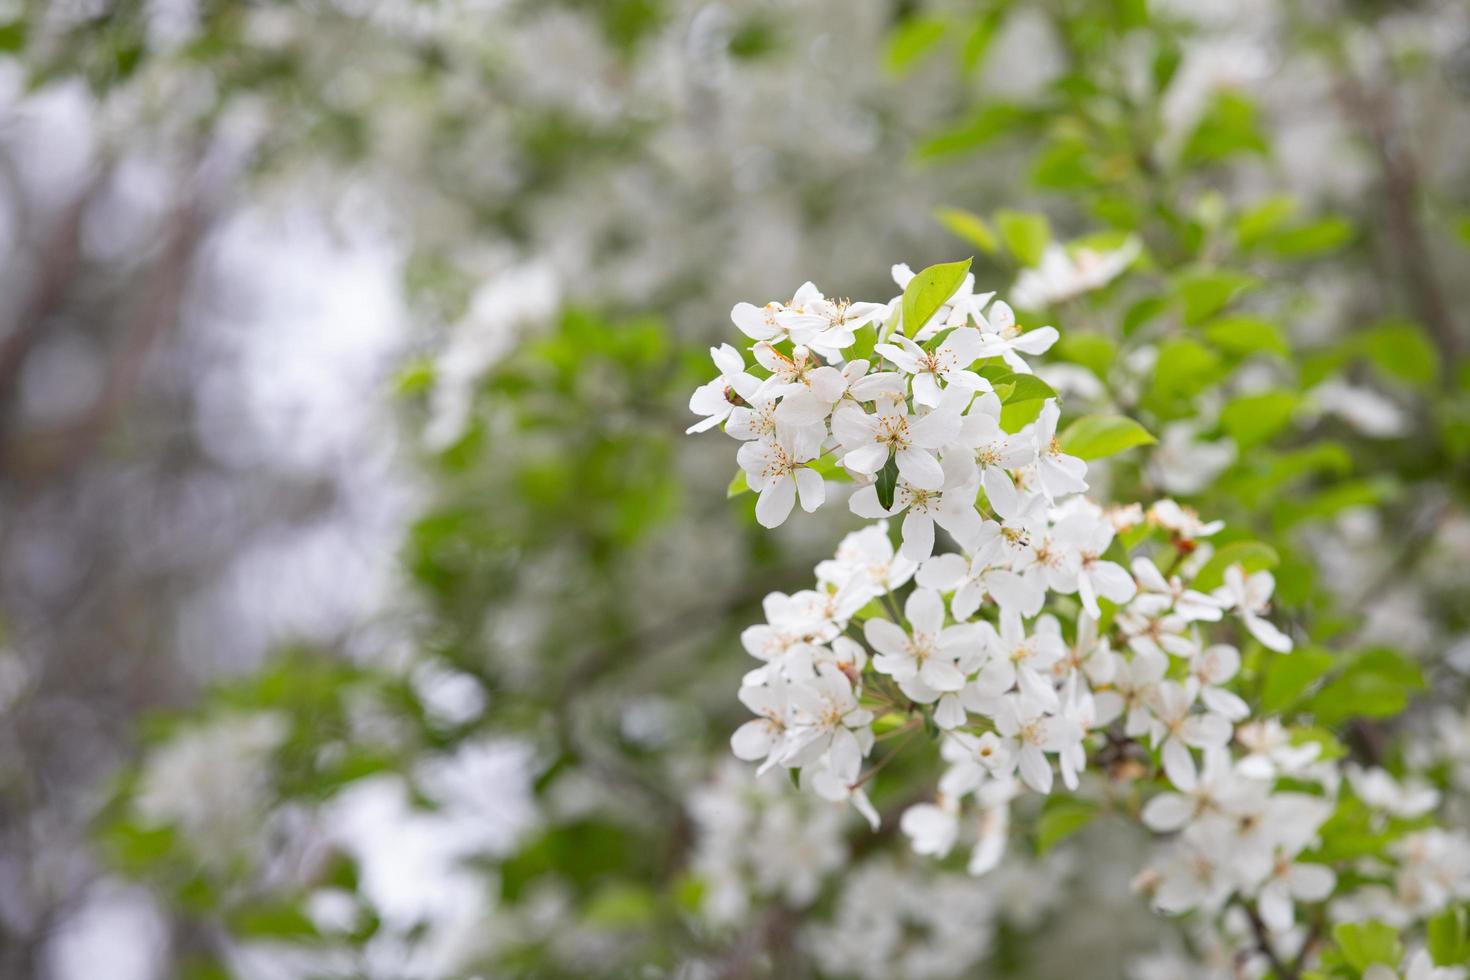 The white flowers in the spring tone. Beautiful flowers in nature photo